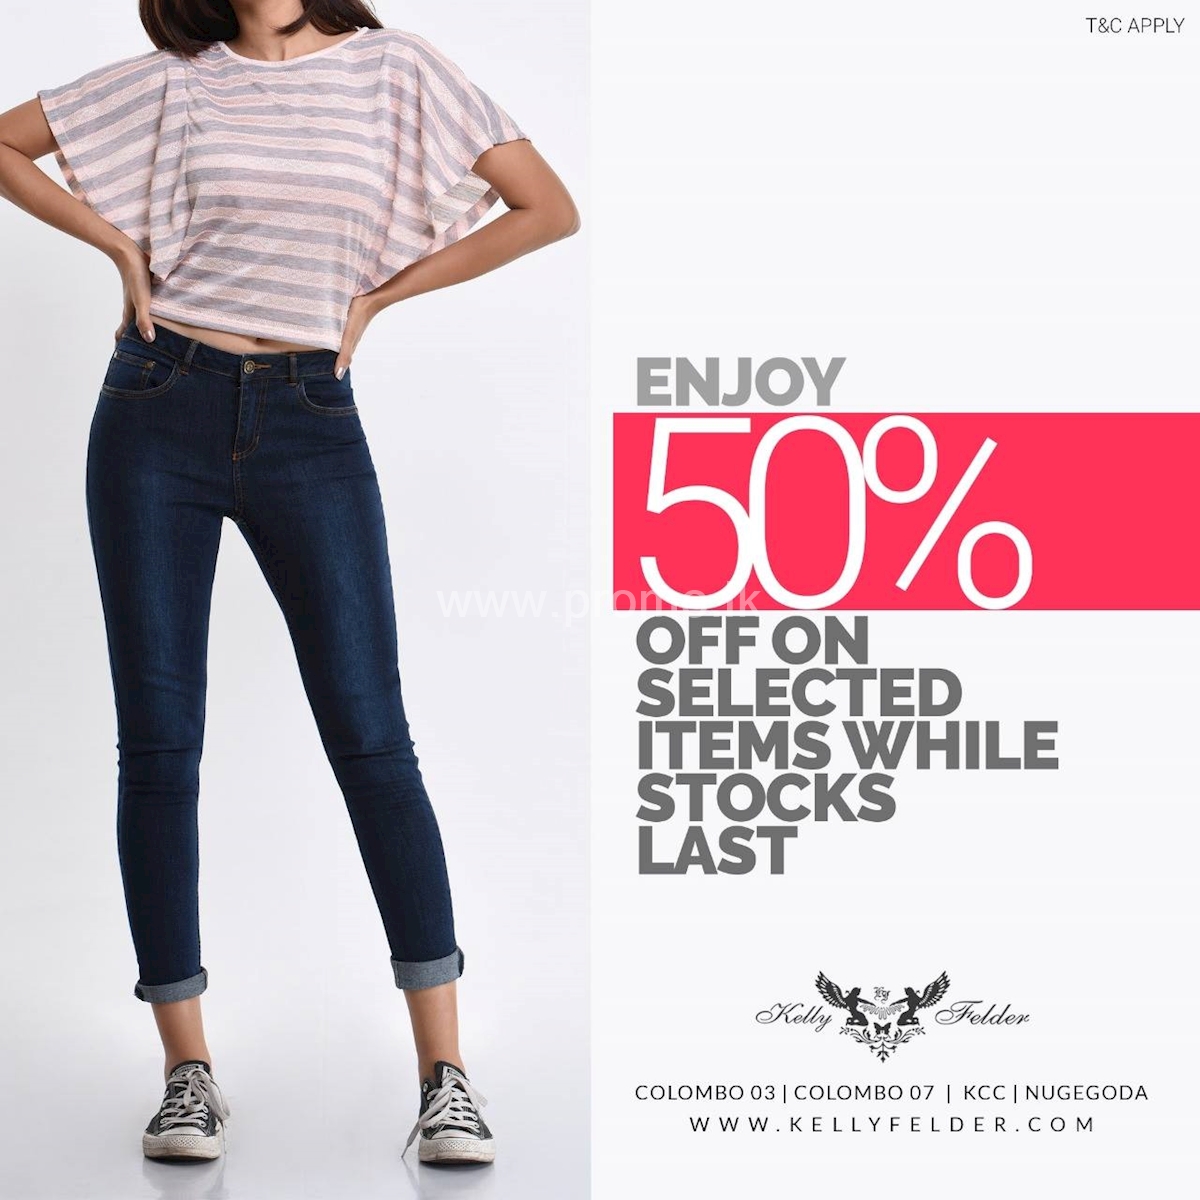 Upto 50% Off on selected Items from Kelly Felder